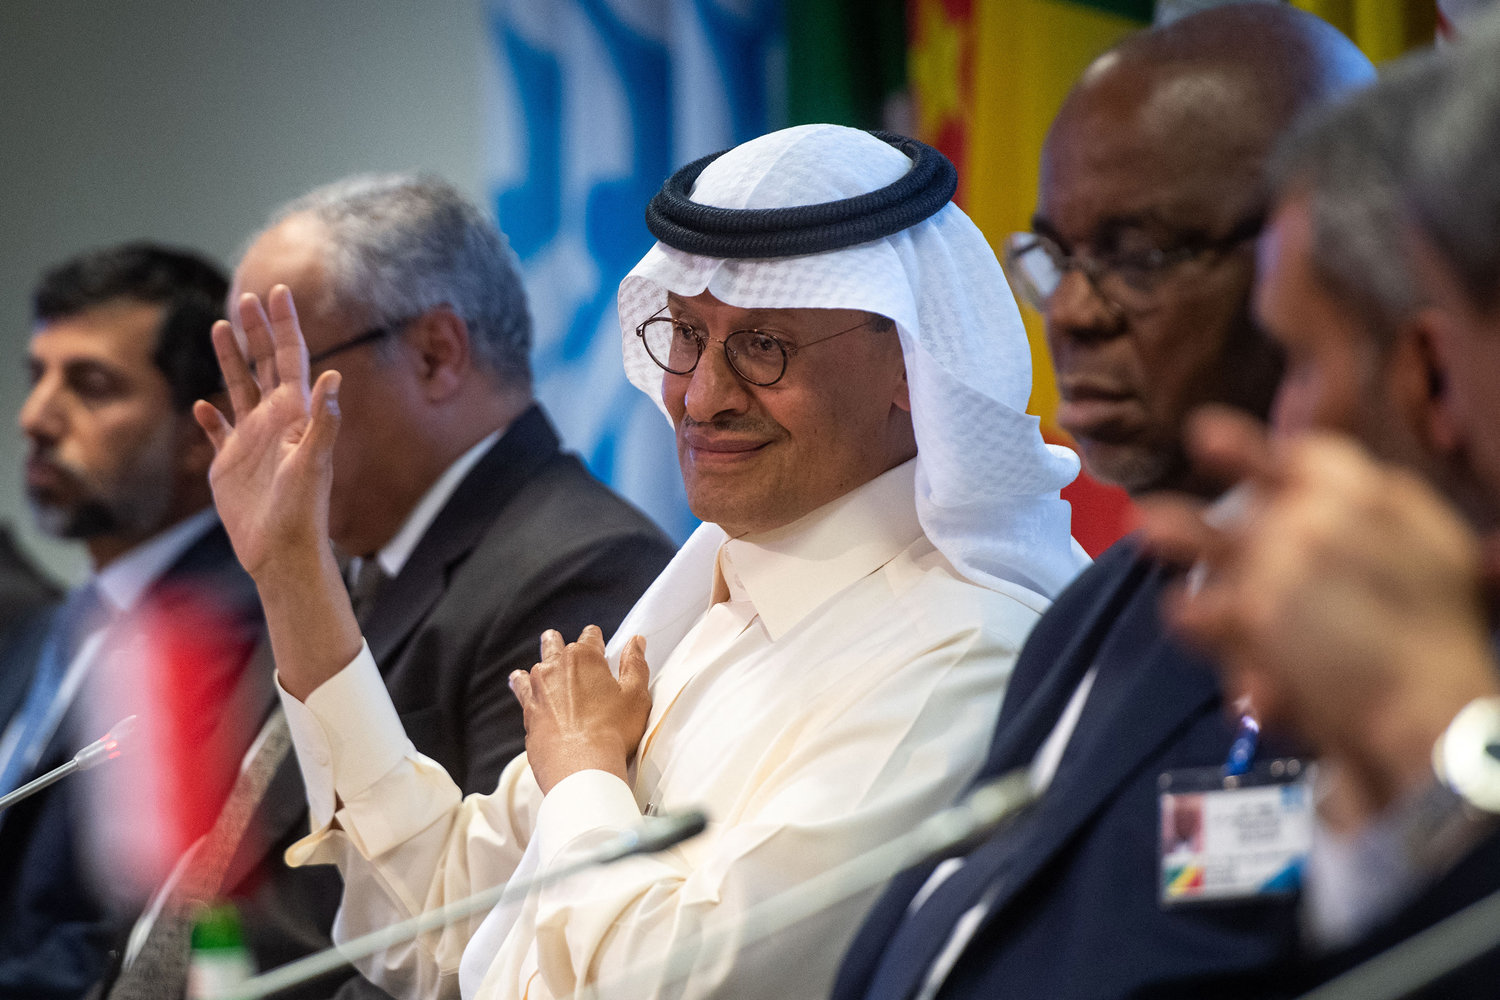 Saudi Arabia's Minister of Energy Abdulaziz bin Salman gestures during a press conference after the 45th Joint Ministerial Monitoring Committee and the 33rd OPEC and non-OPEC Ministerial Meeting in Vienna, Austria, on Oct. 5, 2022. (Vladimir Simicek/AFP/Getty Images/TNS)